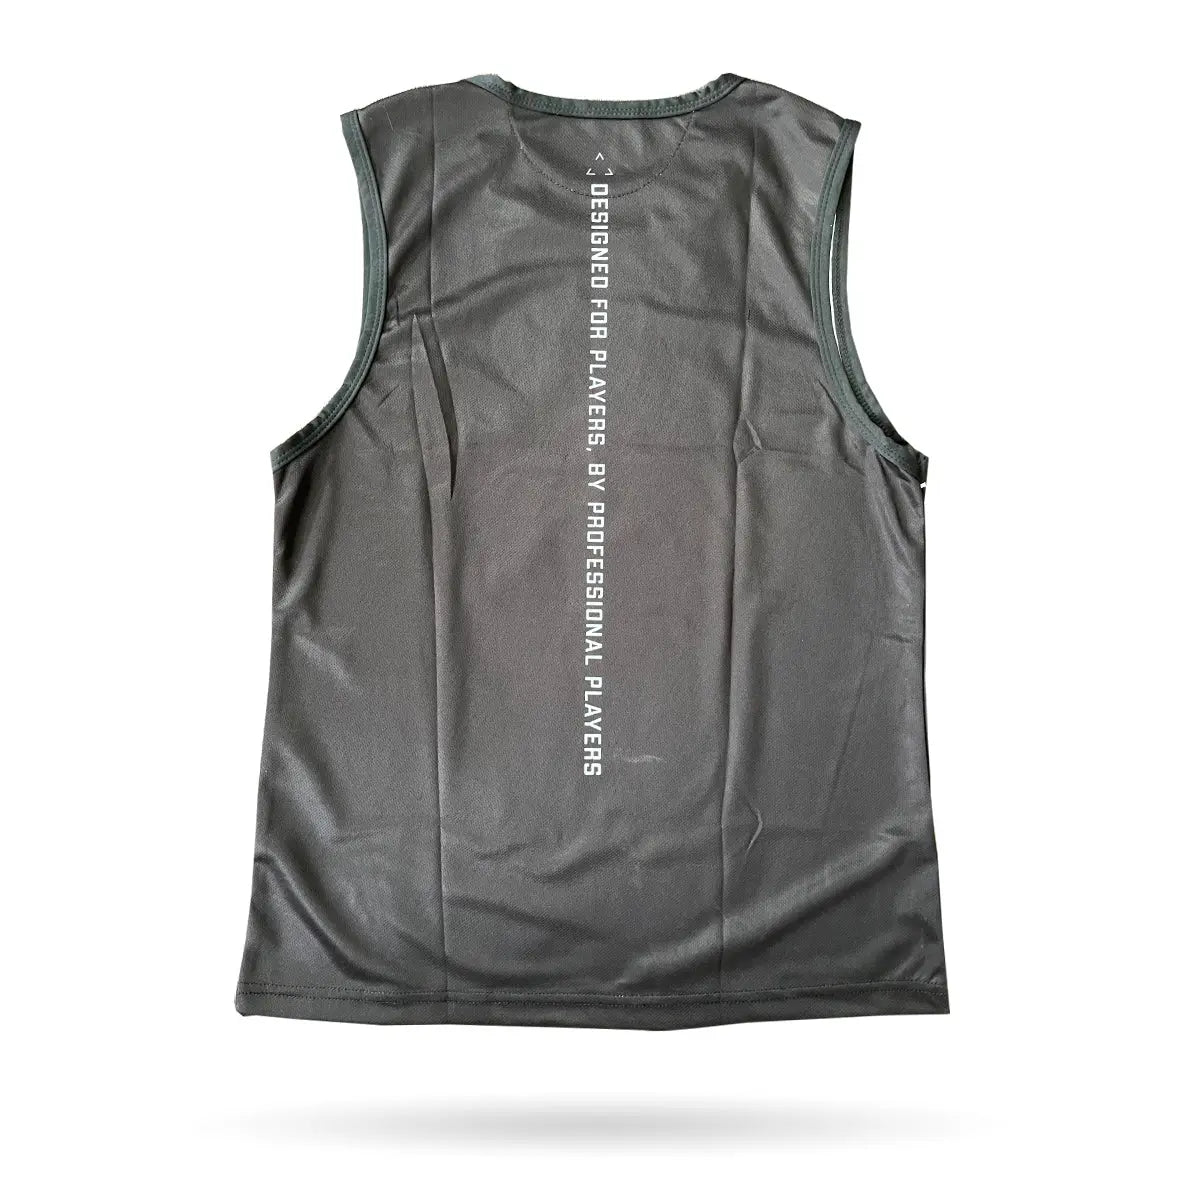 DRY-FIT TANK TOP - PRO DNA Infamous Paintball